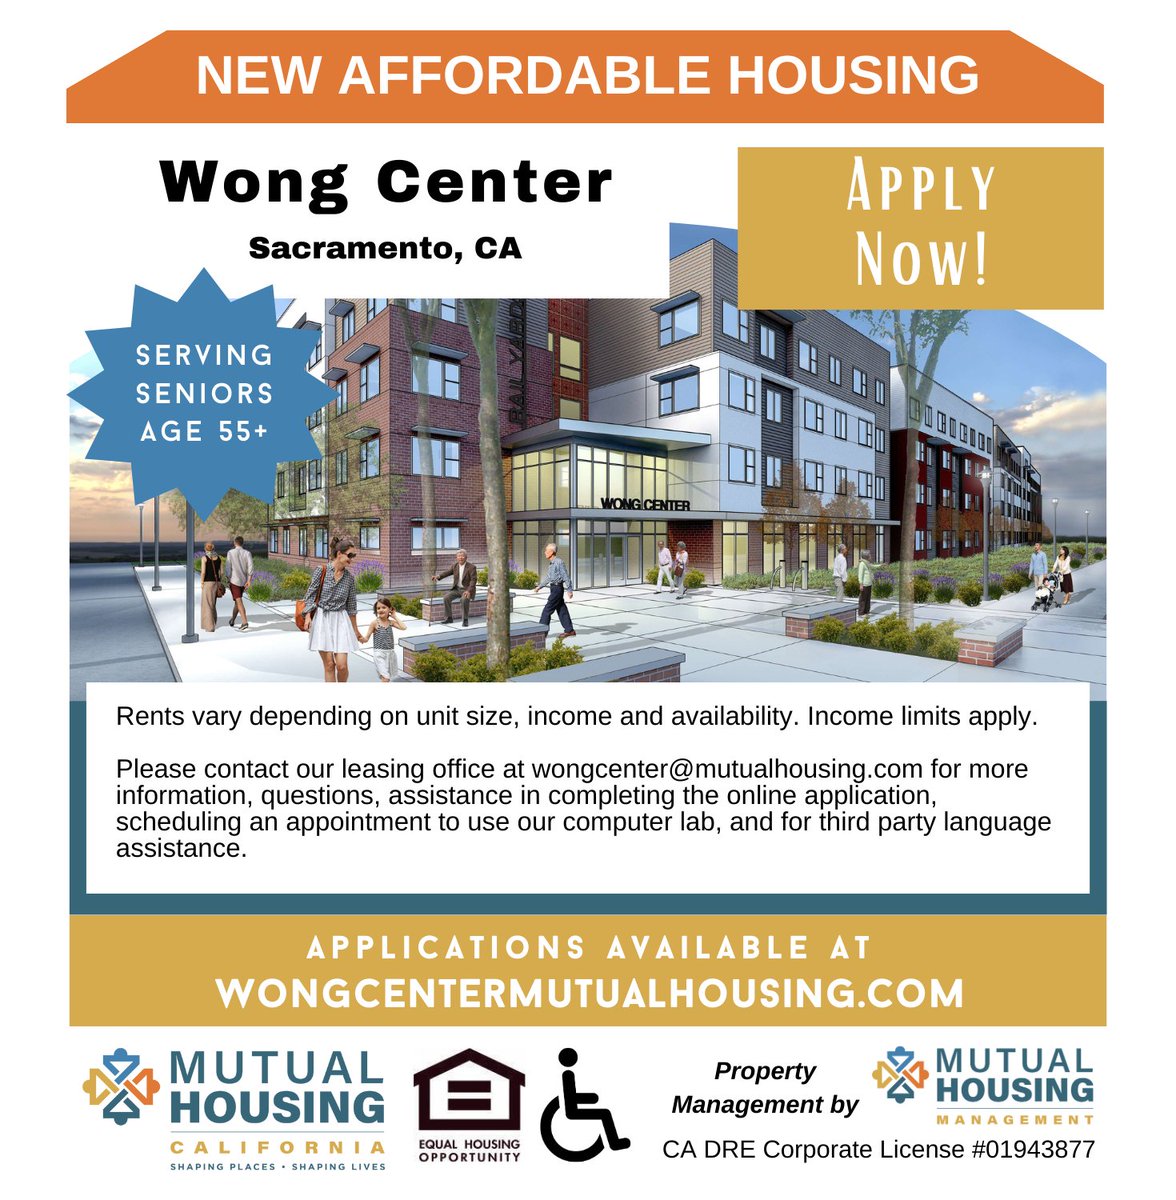 ICYMI, Wong Center, our newest affordable housing community is now accepting applications. It is located in the historic Railyards District in Downtown Sacramento. Visit the website below to view floorplans, community highlights, or apply online: wongcentermutualhousing.com